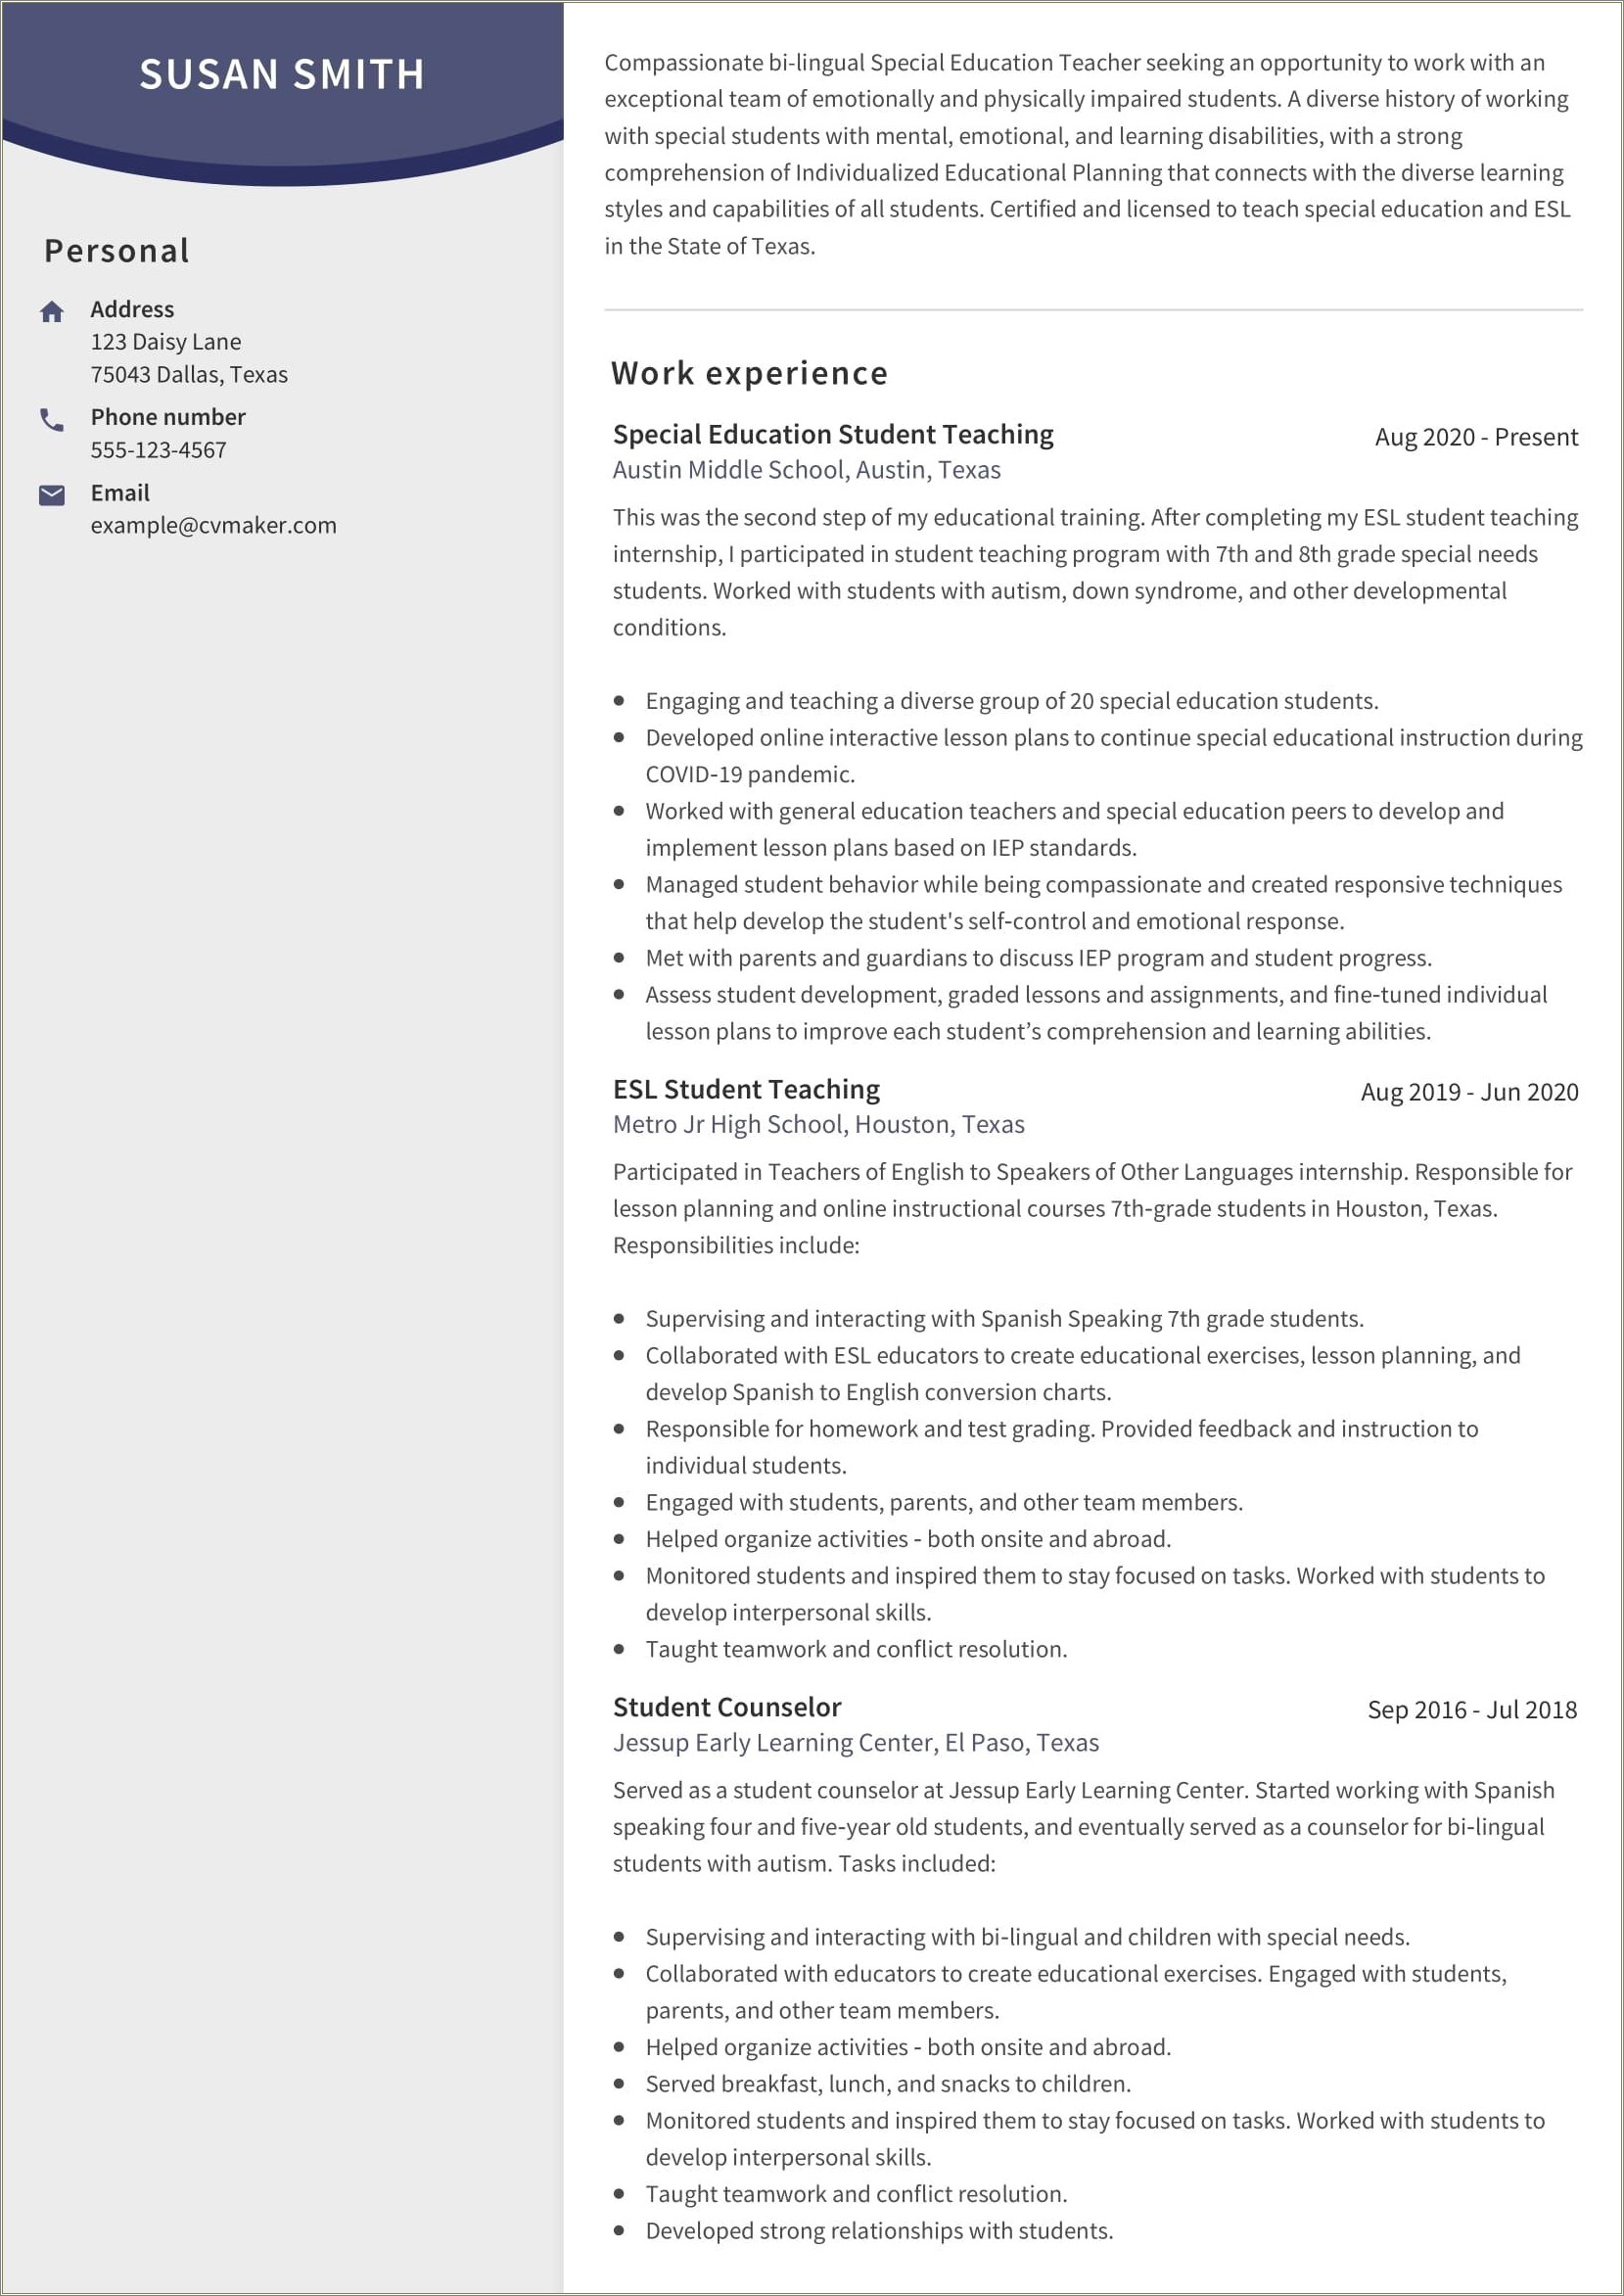 An Example Of Resume For Teachers